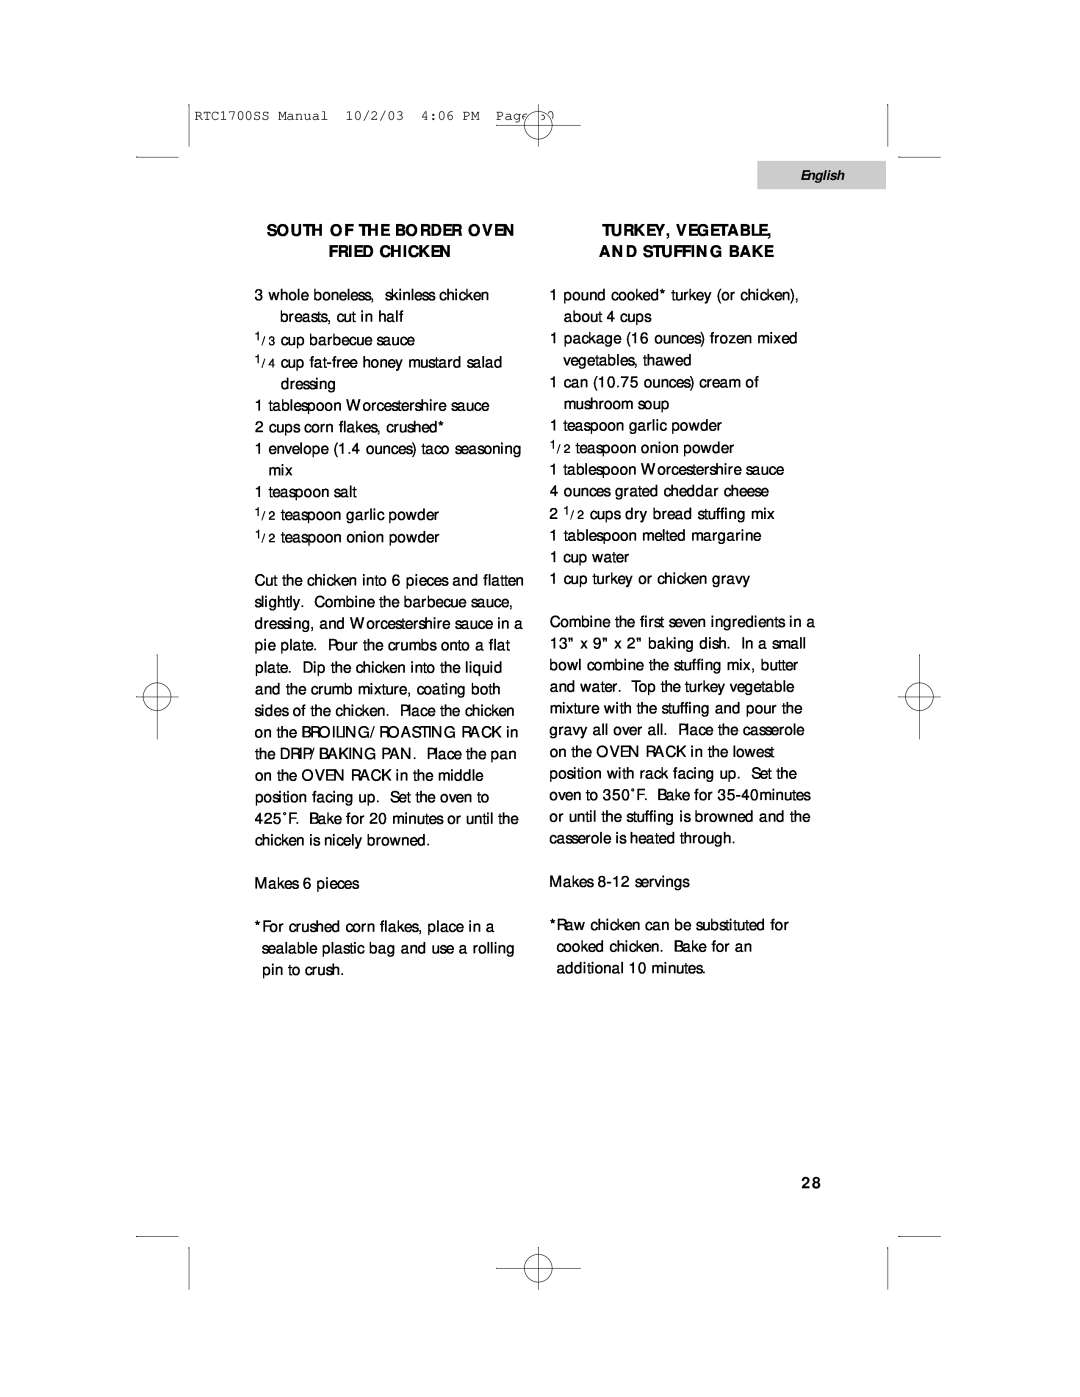 Haier RTC1700SS user manual English, South Of The Border Oven, Turkey, Vegetable, Fried Chicken, And Stuffing Bake 